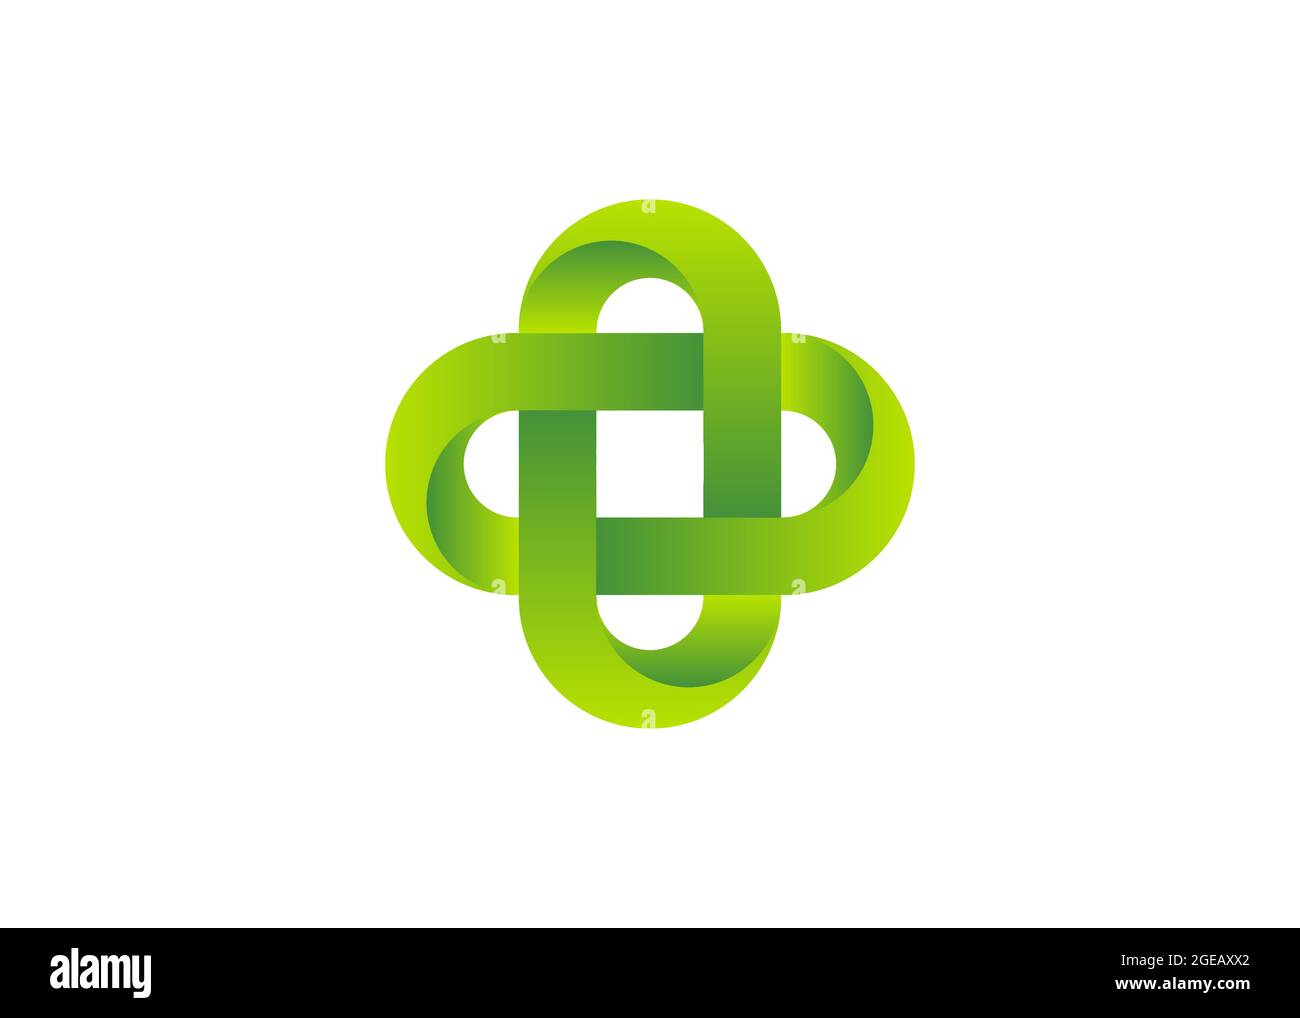 3D green logo in celtic know style, Business Abstract icon. Corporate, Media, Overlapping Cross. Bio Technology styles vector design template isolated Stock Vector